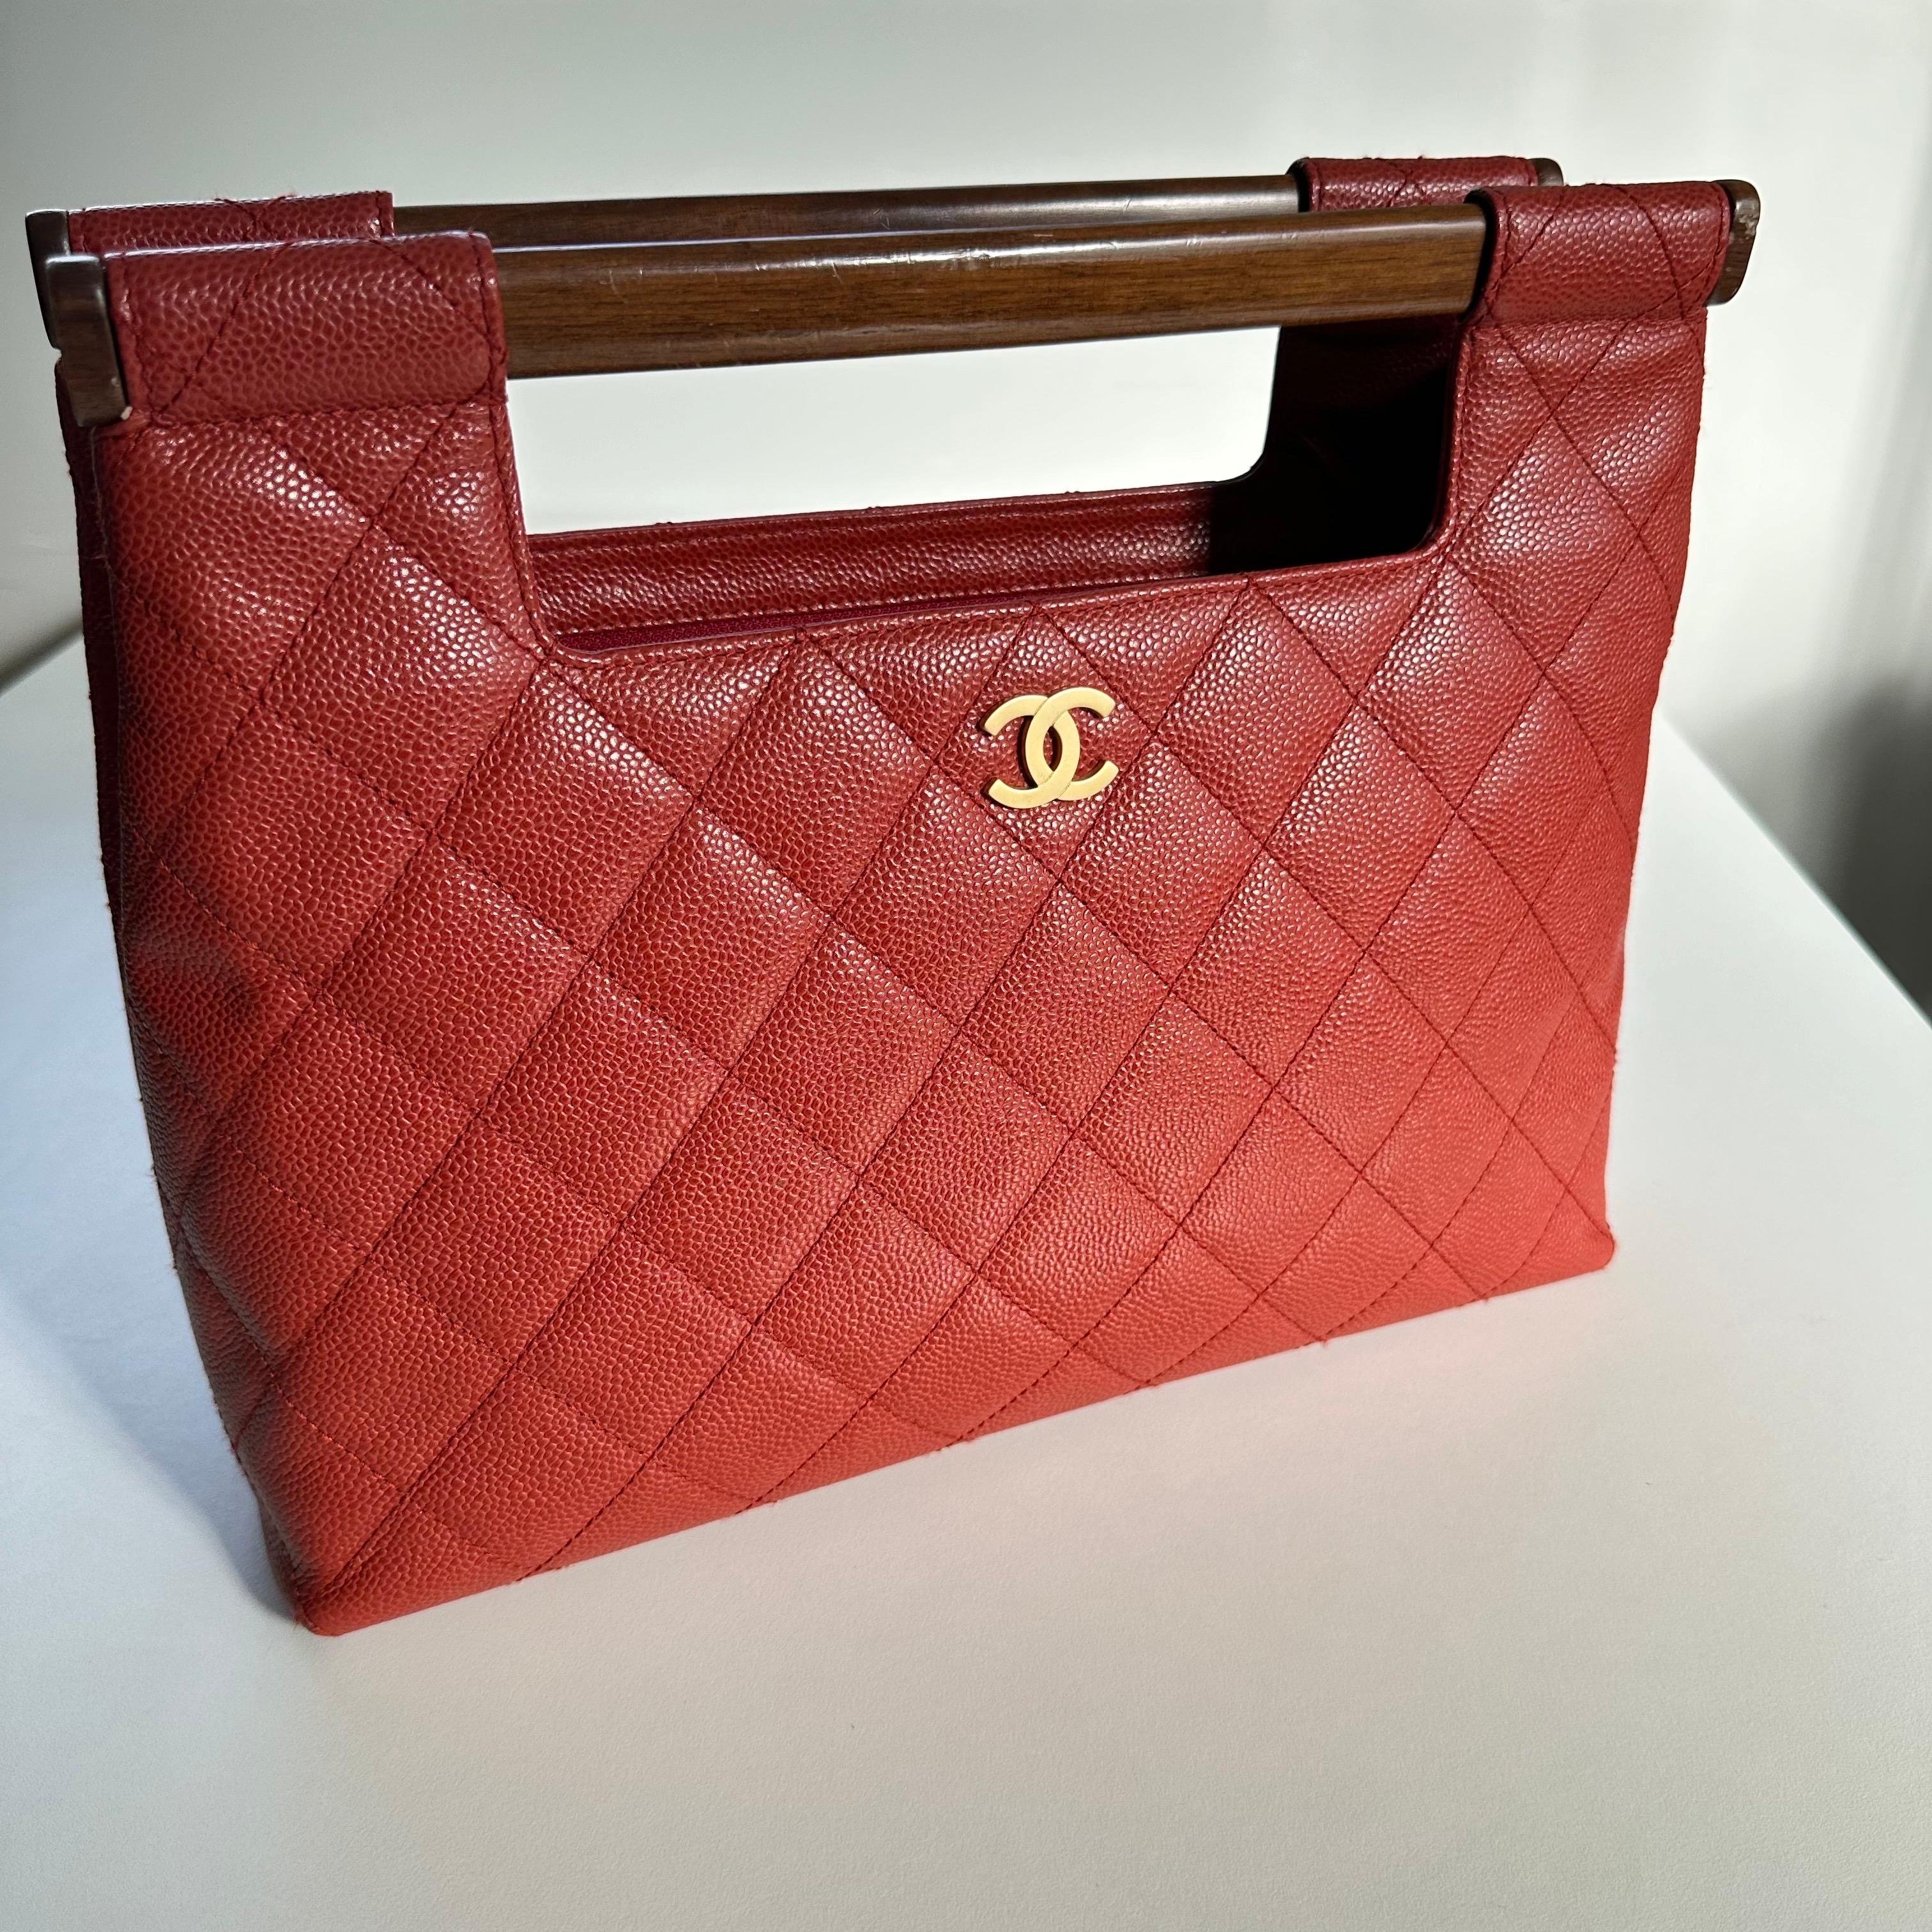 Chanel 2003 Wood Top Handle Rare Red Caviar Jumbo Kelly Envelope Clutch Tote Bag For Sale 5